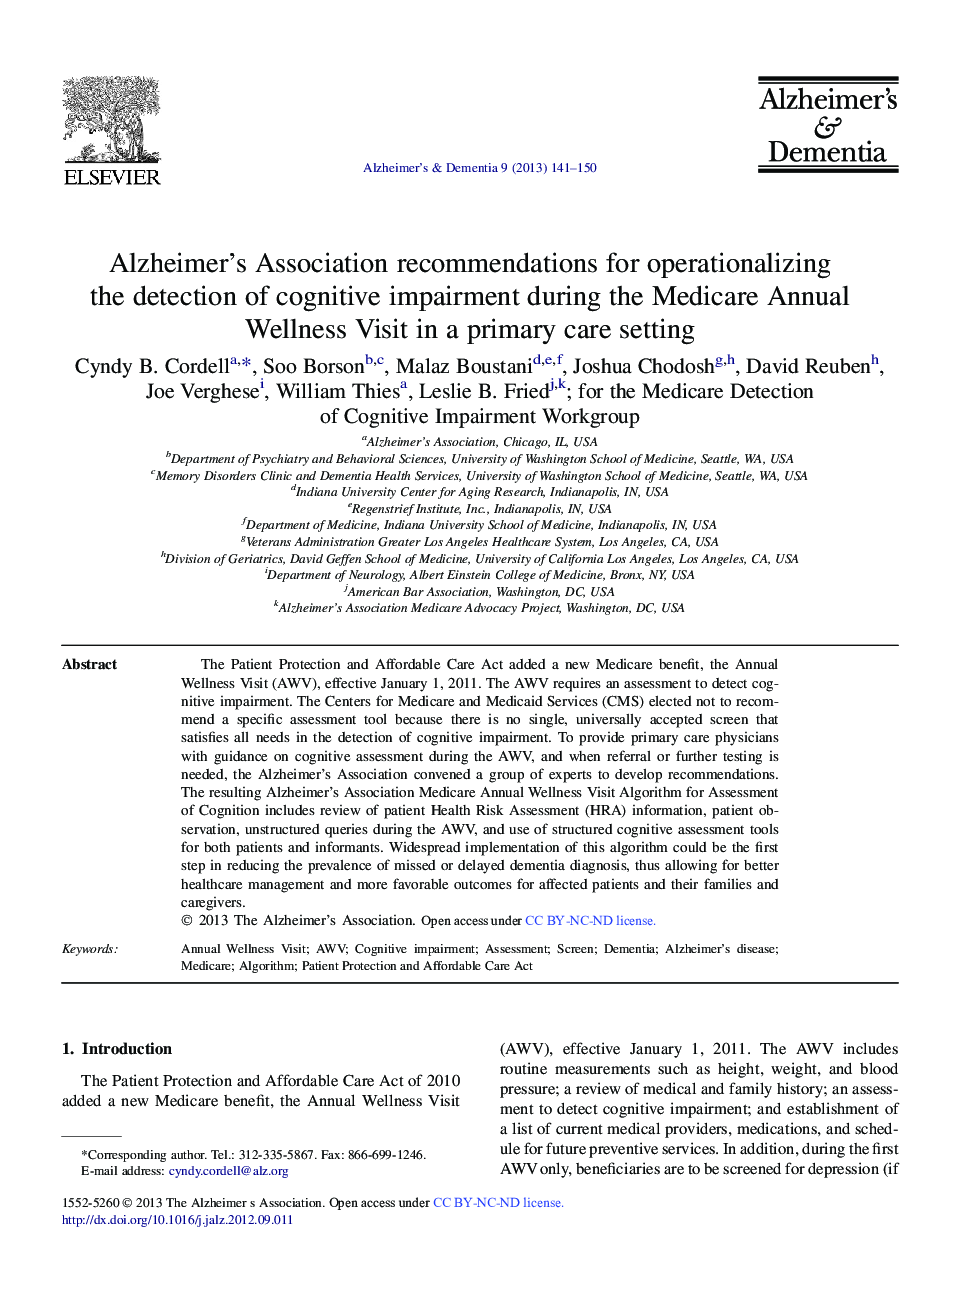 PerspectiveAlzheimer's Association recommendations for operationalizing theÂ detection of cognitive impairment during the Medicare Annual Wellness Visit in a primary care setting